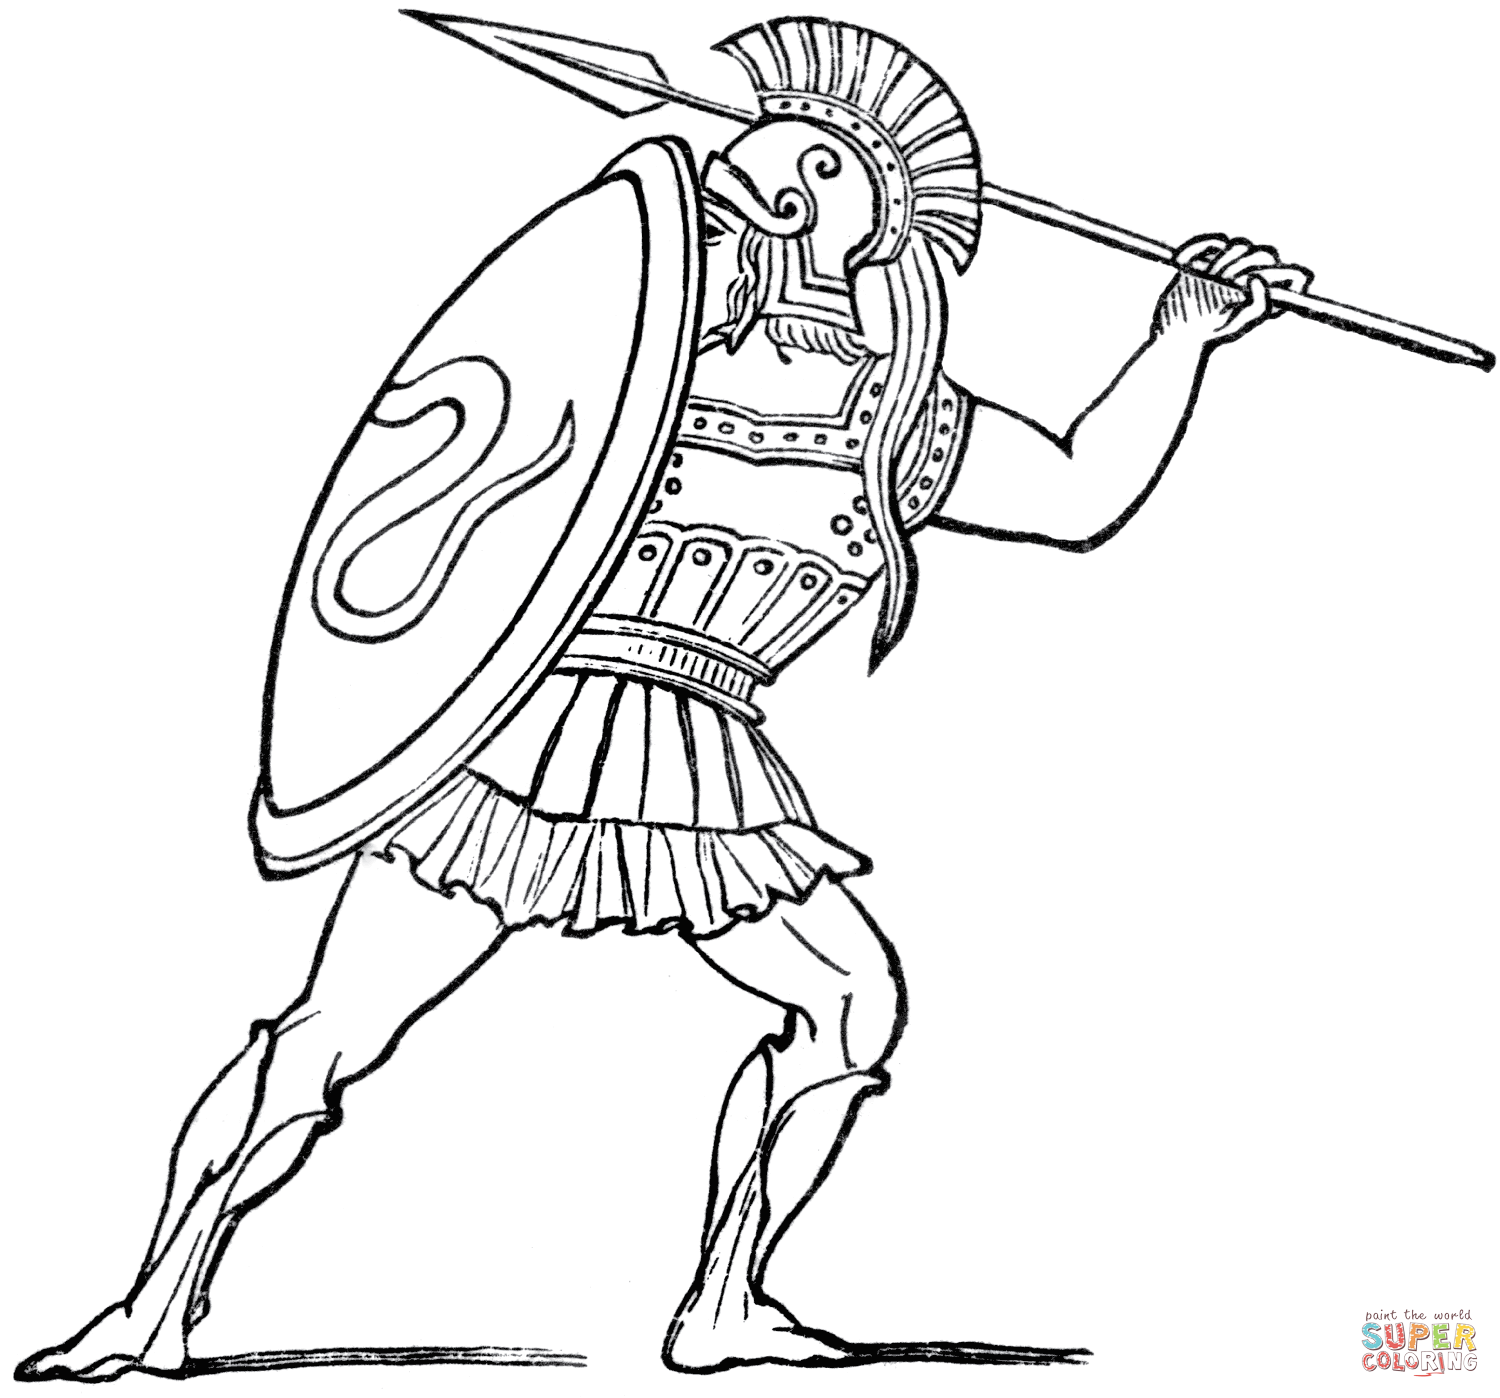 Spartan Warrior coloring page | Free Printable Coloring Pages